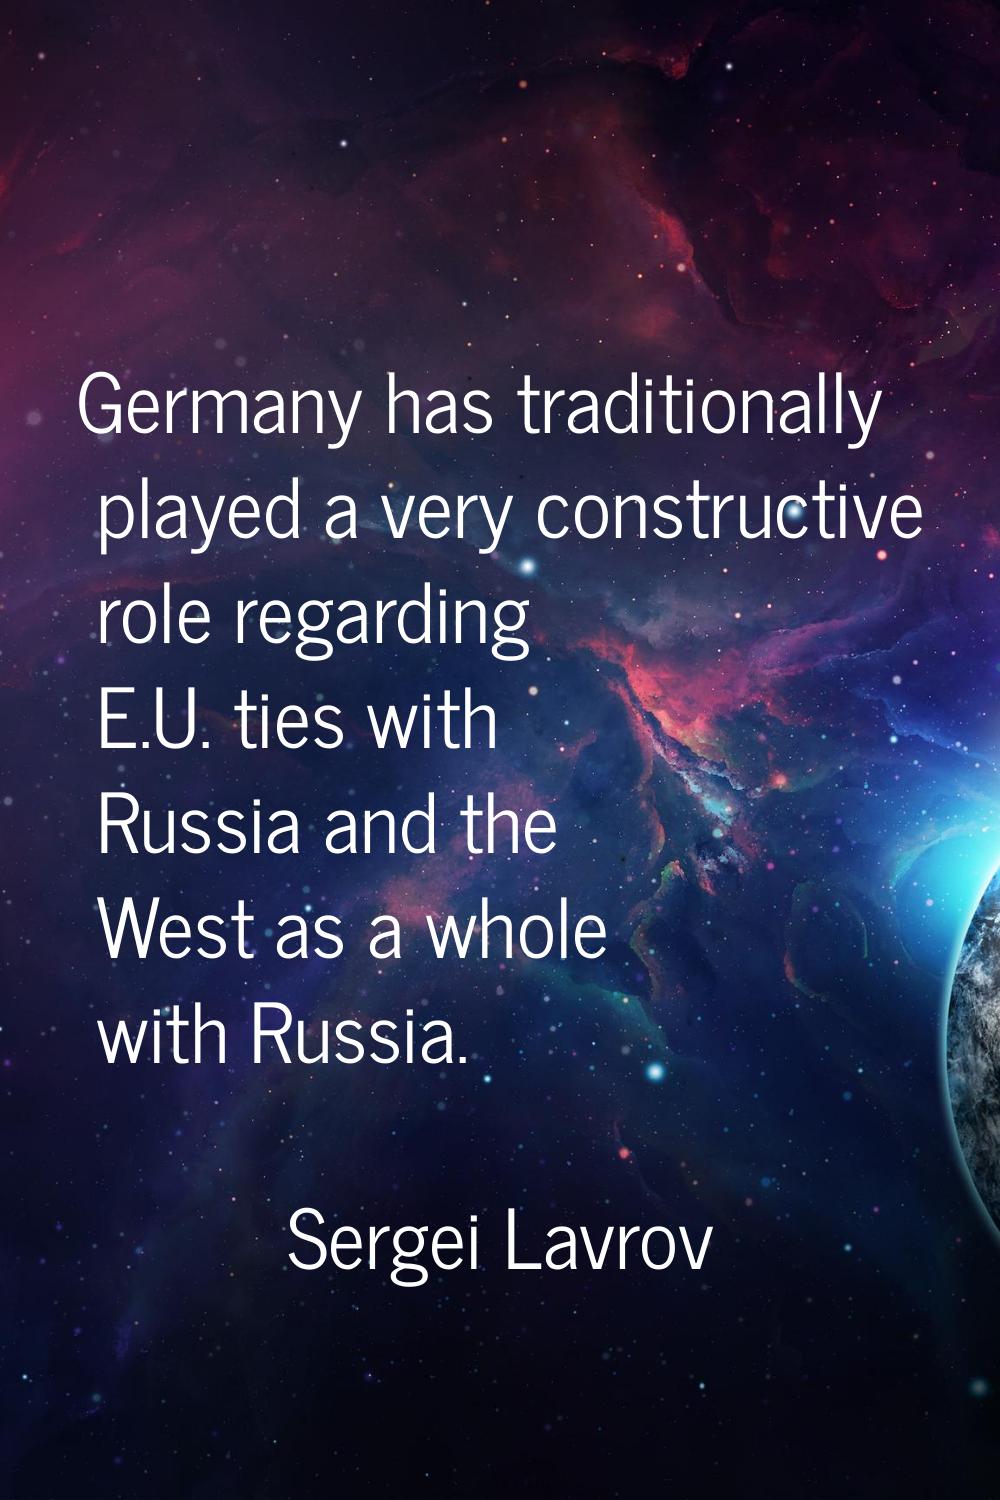 Germany has traditionally played a very constructive role regarding E.U. ties with Russia and the W